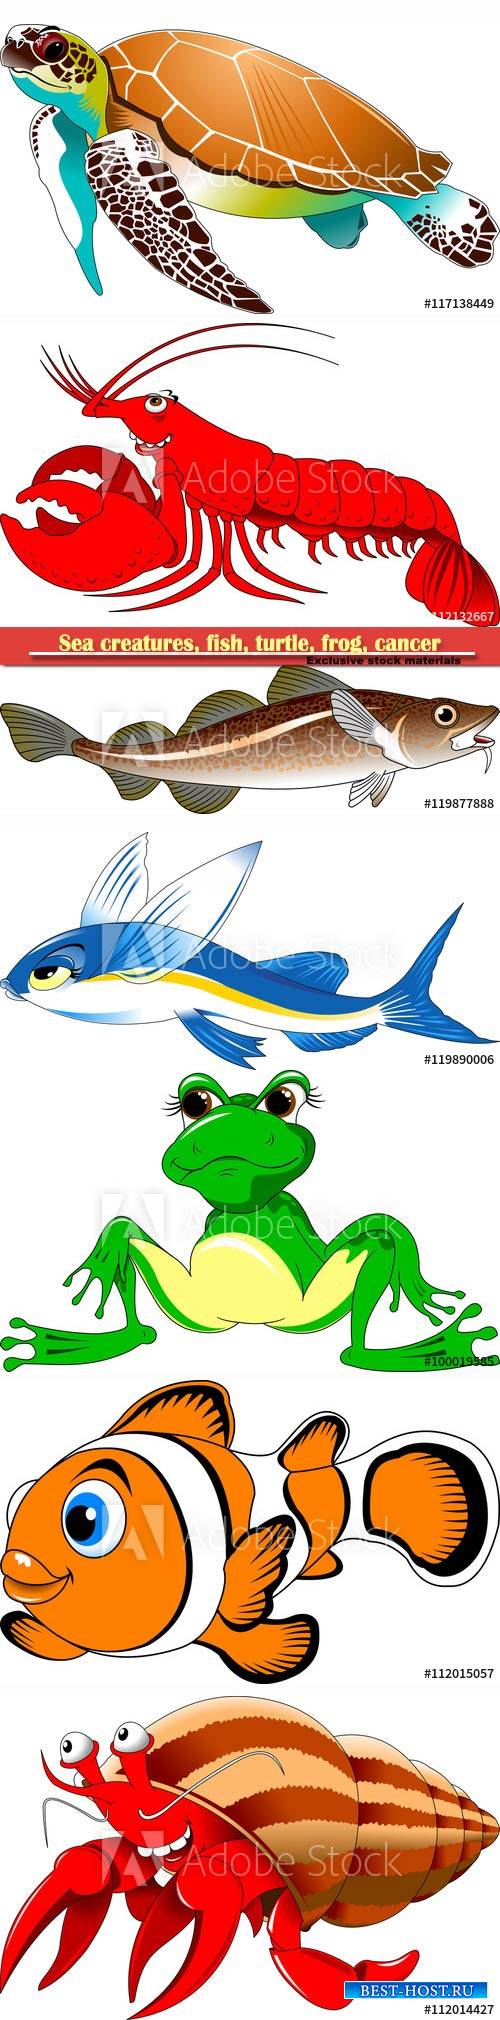 Sea creatures, fish, turtle, frog, cancer